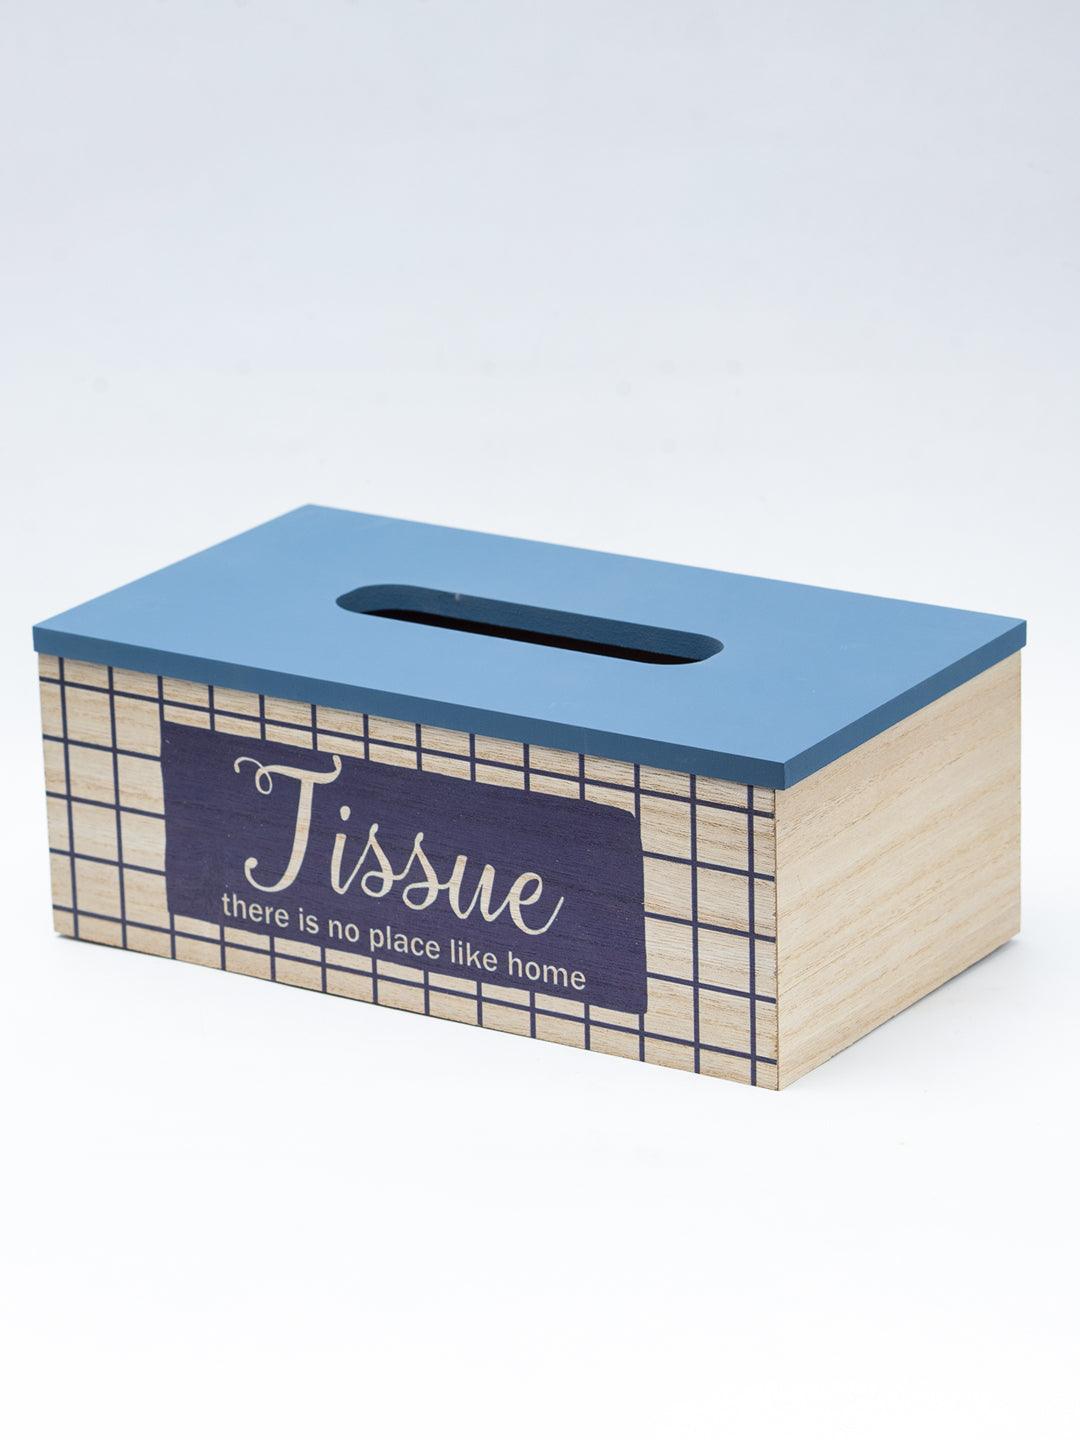 Exquisite Blue Tissue Holder Box For Home - 4